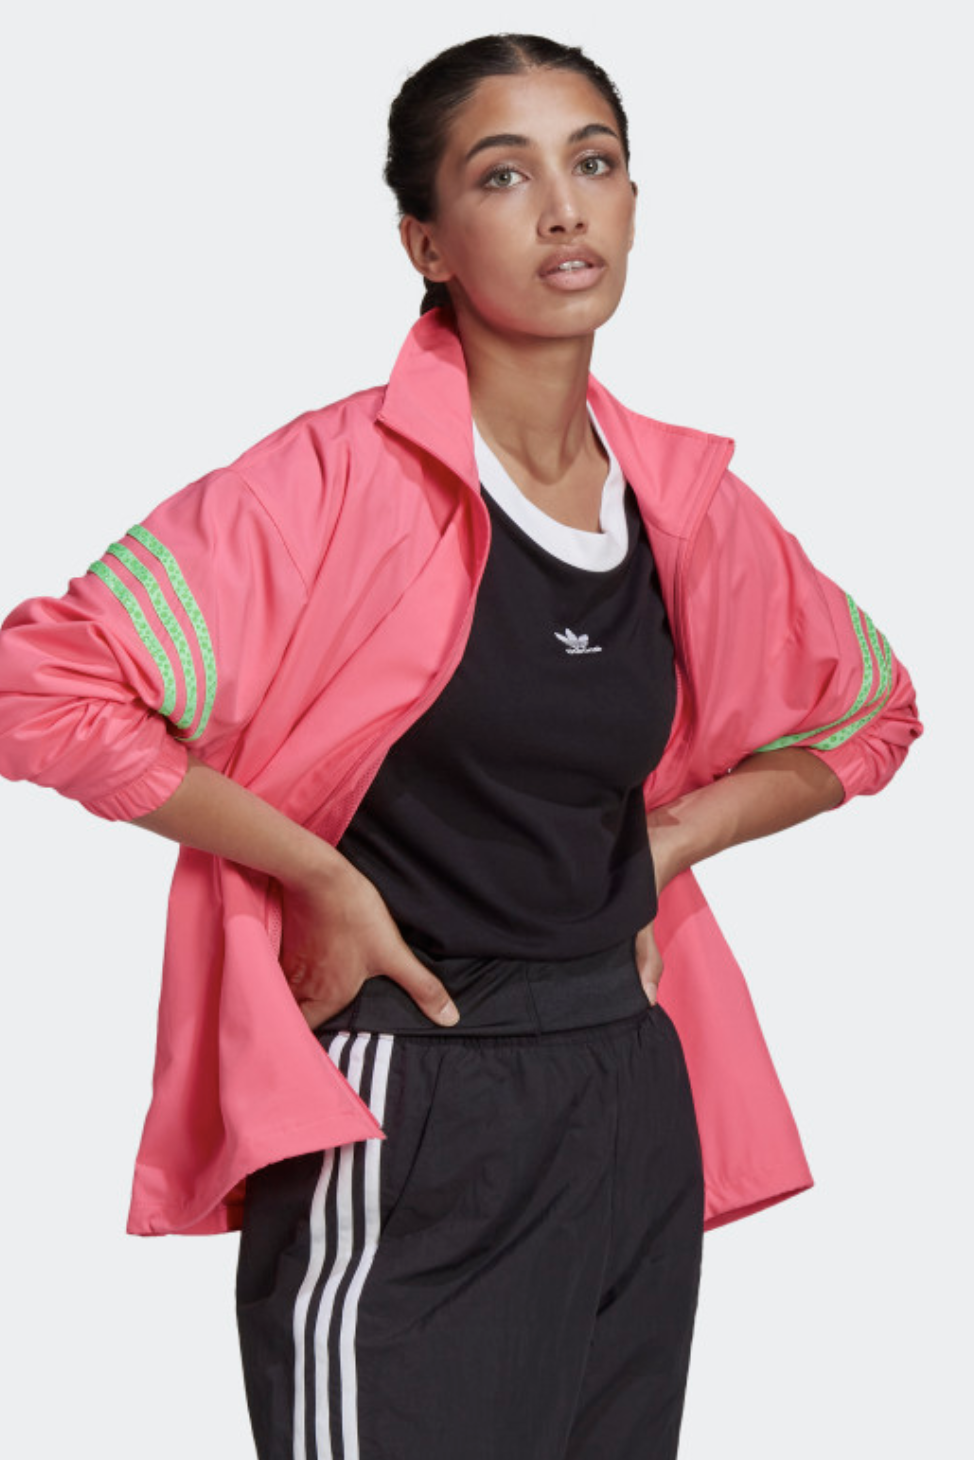 32 Activewear Brands 2022 - Cute Workout Outfits